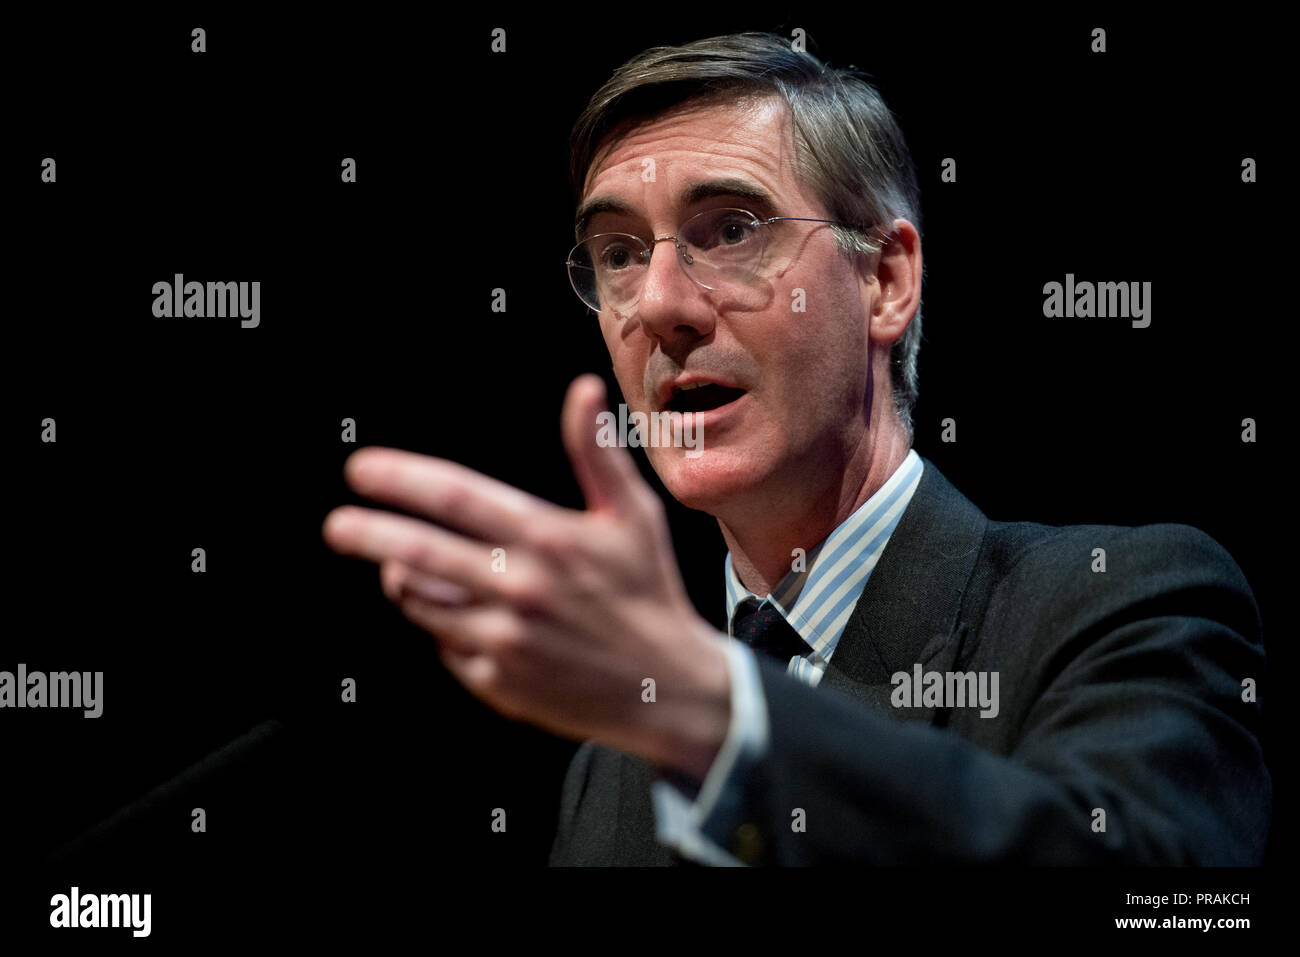 Birmingham, UK. 30th September 2018. Jacob Rees-Mogg, MP for North East Somerset, speaks at the Brexit Central fringe event at the Conservative Party Conference in Birmingham. © Russell Hart/Alamy Live News. Stock Photo